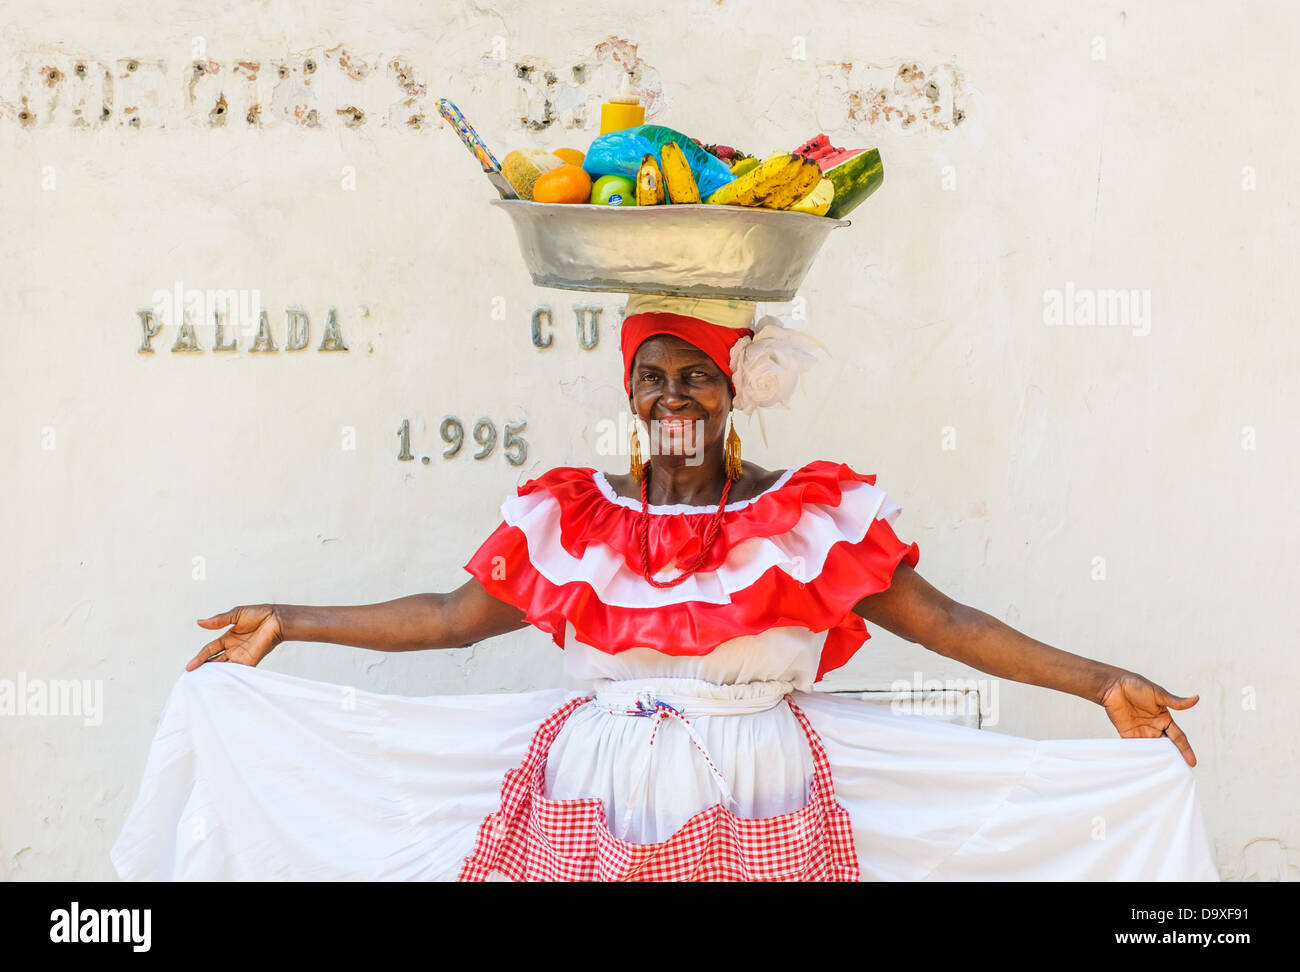 Palenquera woman sells fruits at Plaza Santo Domingo on December, 02, 2009 in Cartagena, Colombia Stock Photo